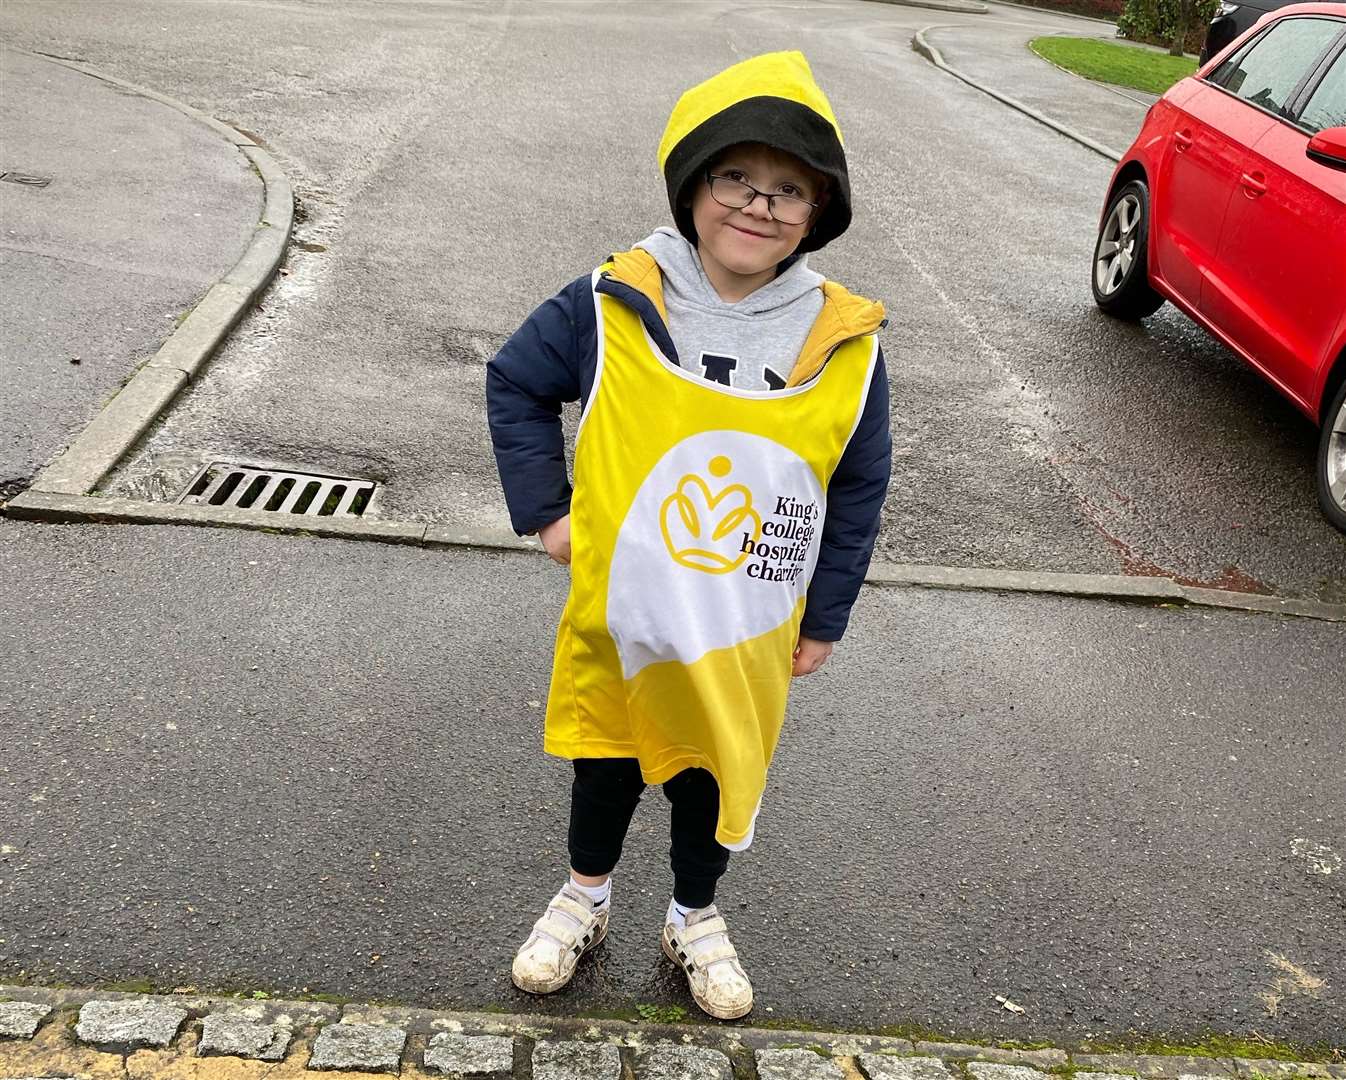 Seven-year-old Jessie is raising money for a slide at King's College Hospital